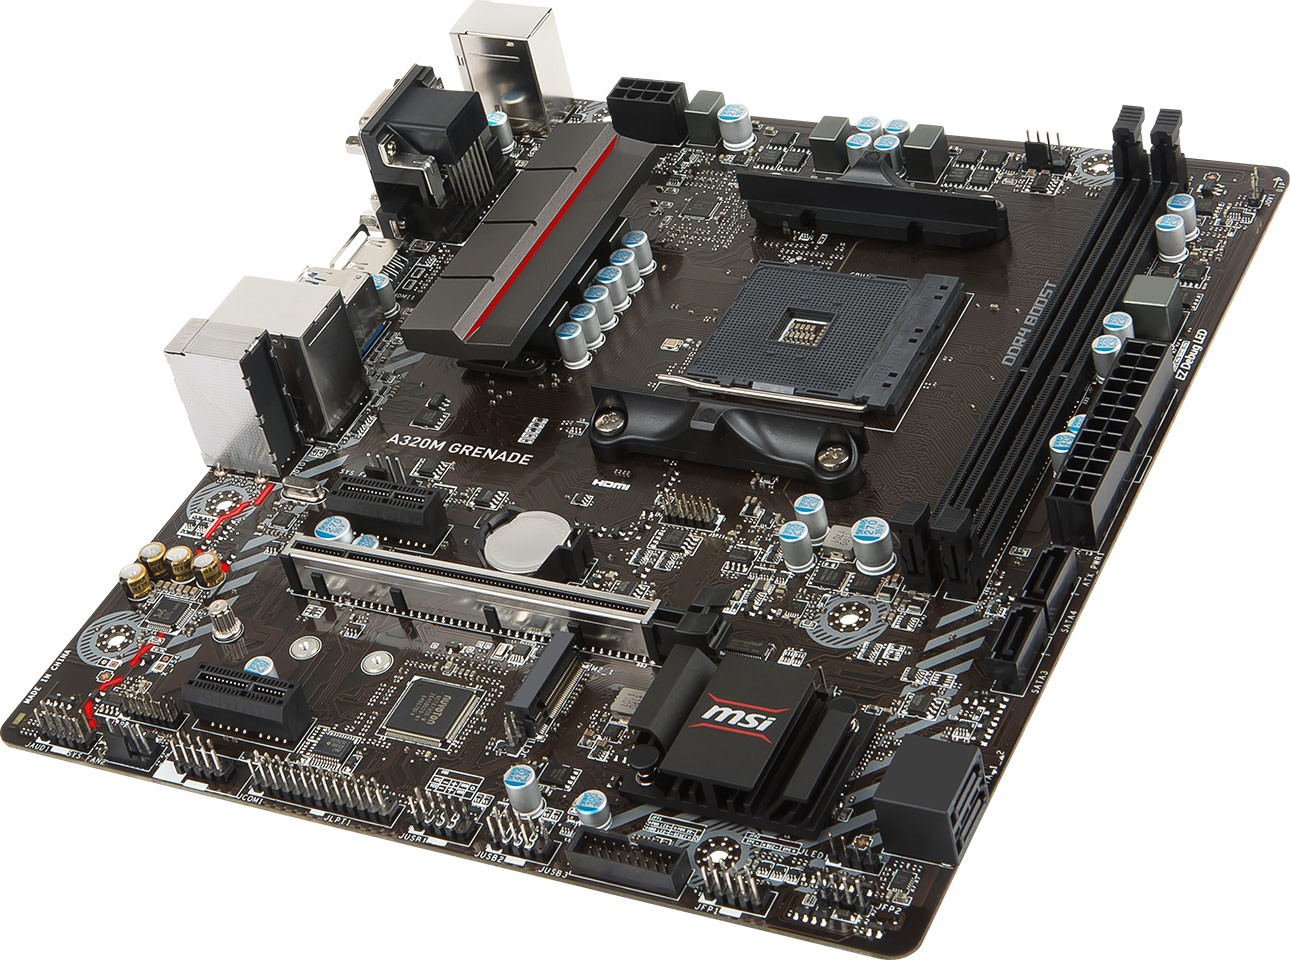 MSI introduce their new A320 Grenade AM4 motherboard